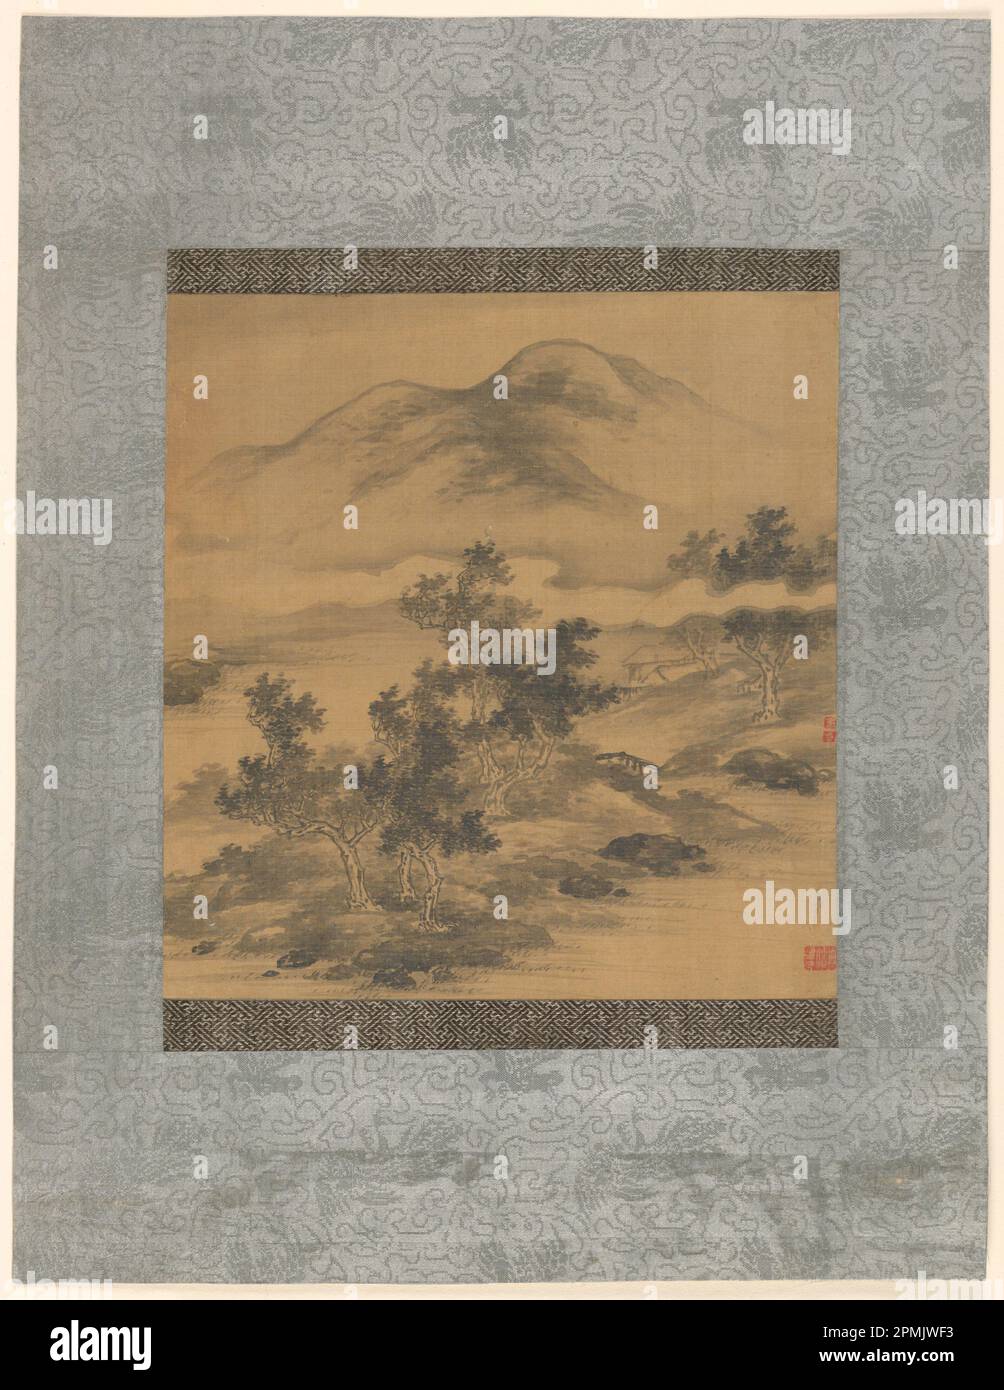 Drawing, Mountain Landscape; brush and black ink on silk, mounted, and with a gray brocade mat; 27.2 x 25.9 cm (10 11/16 x 10 3/16 in.), mat: 49 x 37.5 cm (19 5/16 x 14 3/4 in.) Stock Photo